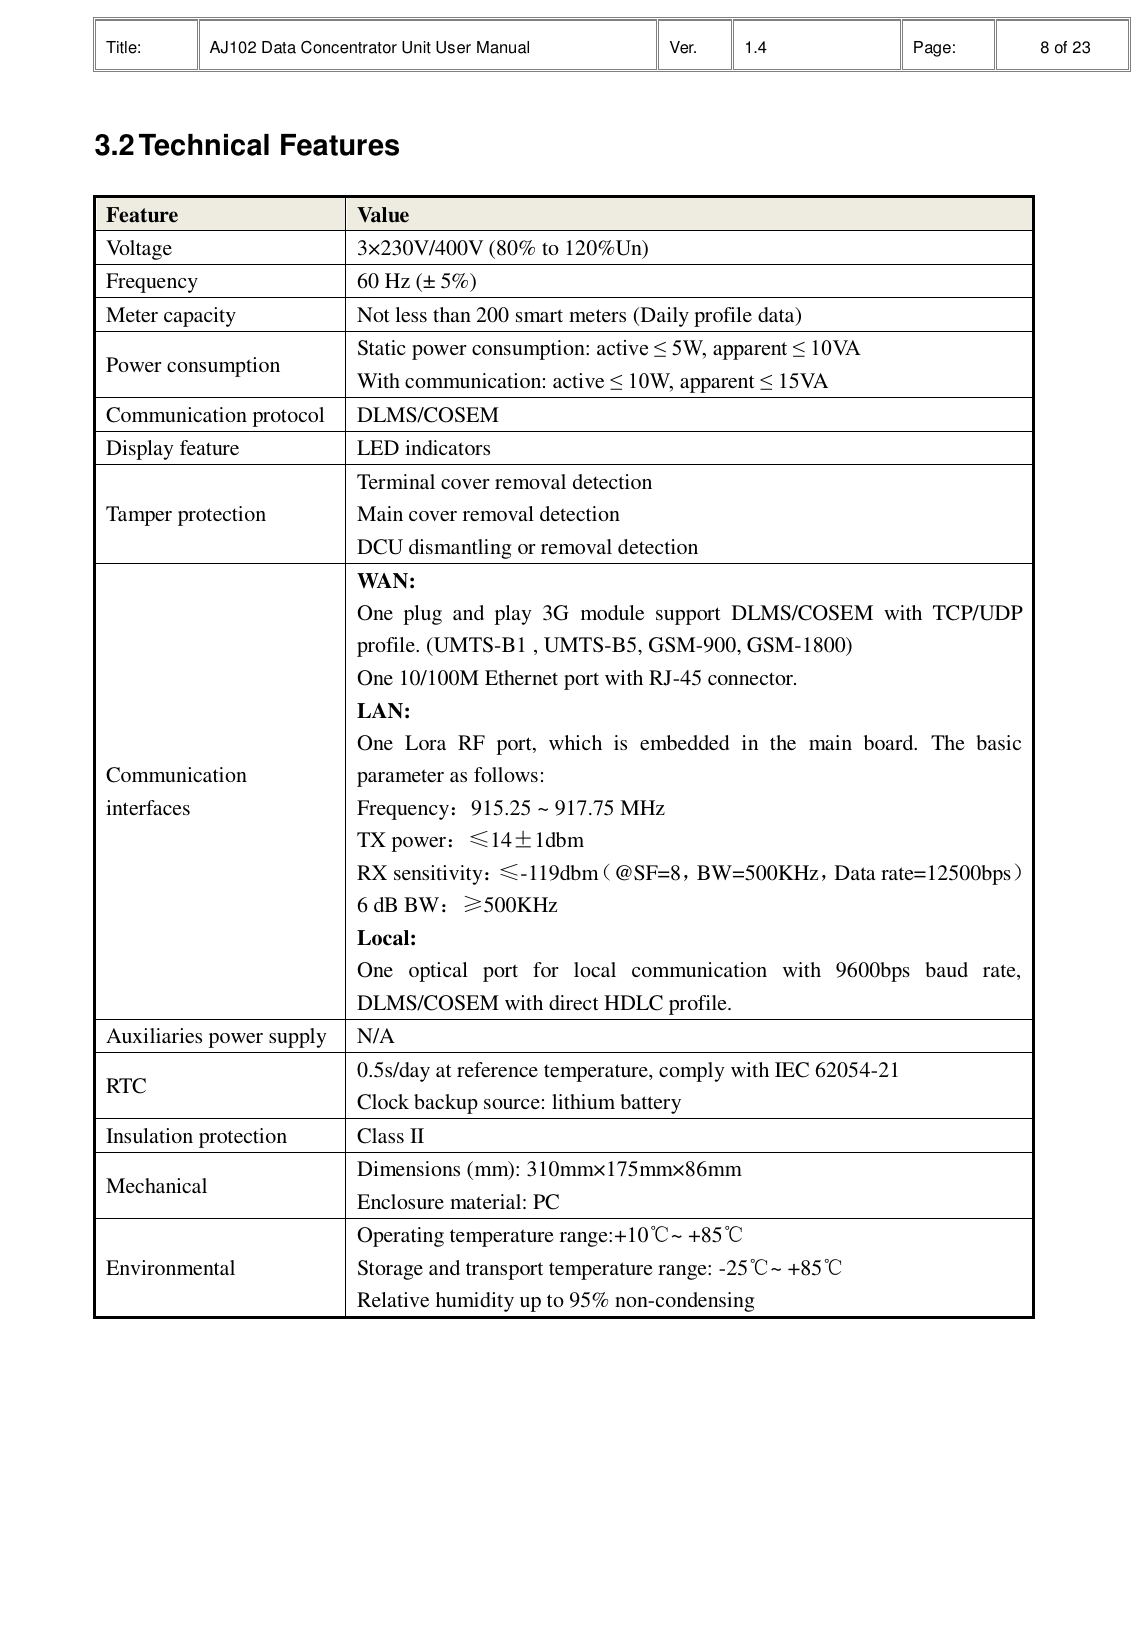 Title: AJ102 Data Concentrator Unit User Manual Ver. 1.4 Page:   8 of 23  3.2 Technical Features Feature Value Voltage 3×230V/400V (80% to 120%Un) Frequency 60 Hz (± 5%) Meter capacity Not less than 200 smart meters (Daily profile data) Power consumption Static power consumption: active ≤ 5W, apparent ≤ 10VA With communication: active ≤ 10W, apparent ≤ 15VA Communication protocol DLMS/COSEM   Display feature LED indicators Tamper protection Terminal cover removal detection Main cover removal detection DCU dismantling or removal detection Communication interfaces WAN: One  plug  and  play  3G  module  support  DLMS/COSEM  with  TCP/UDP profile. (UMTS-B1 , UMTS-B5, GSM-900, GSM-1800) One 10/100M Ethernet port with RJ-45 connector. LAN: One  Lora  RF  port,  which  is  embedded  in  the  main  board.  The  basic parameter as follows:   Frequency：915.25 ~ 917.75 MHz TX power：≤14±1dbm RX sensitivity：≤ -119dbm（@SF=8，BW=500KHz，Data rate=12500bps） 6 dB BW：≥500KHz Local: One  optical  port  for  local  communication  with  9600bps  baud  rate, DLMS/COSEM with direct HDLC profile. Auxiliaries power supply N/A RTC 0.5s/day at reference temperature, comply with IEC 62054-21 Clock backup source: lithium battery Insulation protection Class II Mechanical Dimensions (mm): 310mm×175mm×86mm Enclosure material: PC Environmental Operating temperature range:+10℃~ +85℃     Storage and transport temperature range: -25℃~ +85℃ Relative humidity up to 95% non-condensing        